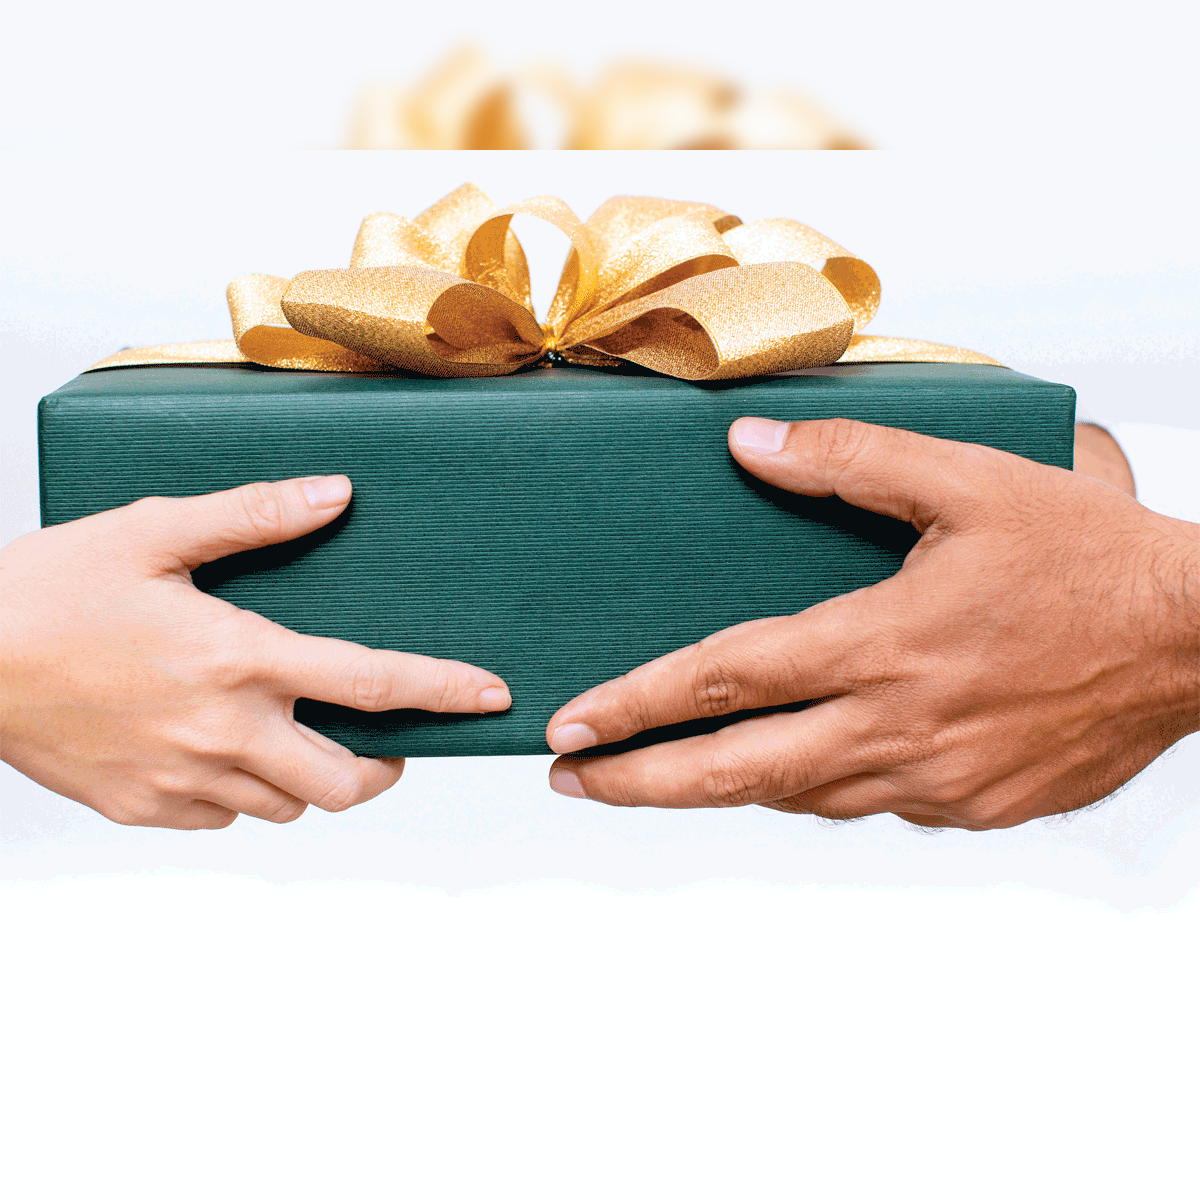 How are gifts taxed in India?